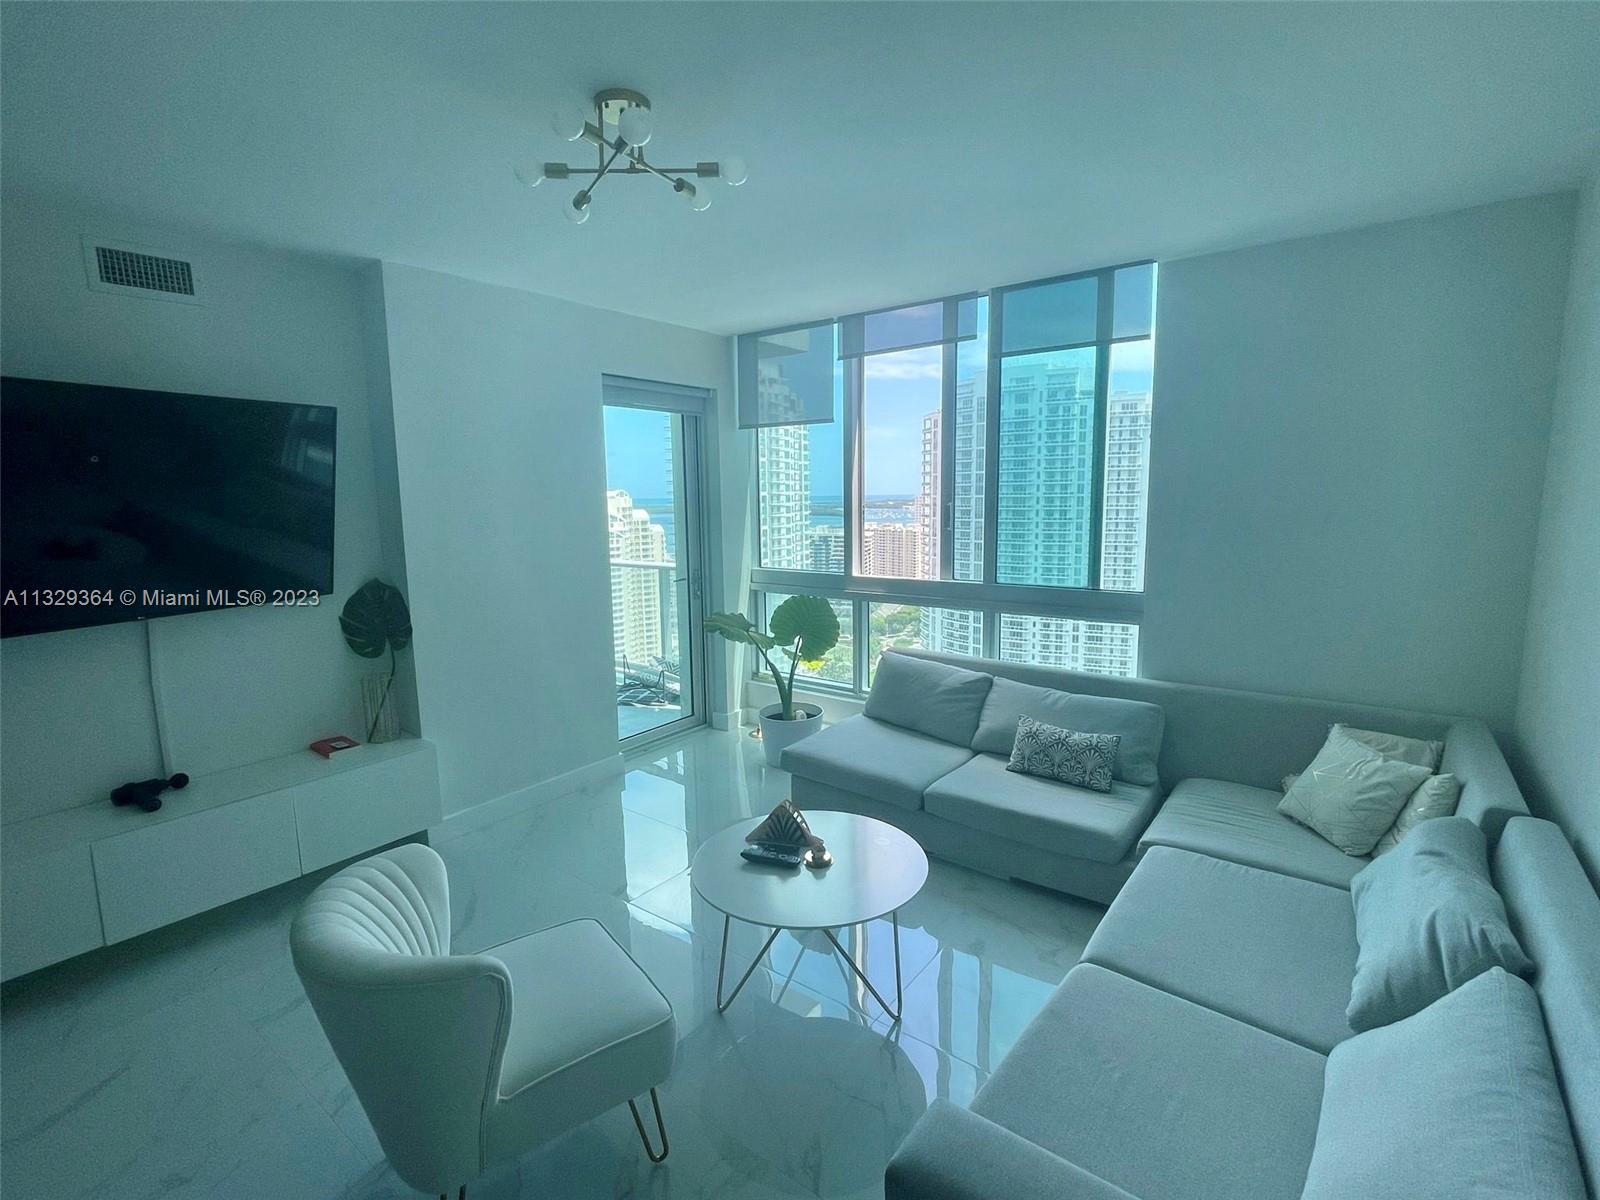 Enjoy living in this beautiful and spacious 2 bed 2 bath with stunning ocean views in the luxury 1 Met building. Newly renovated and fully furnished! split floor plan, porcelain floors throughout, new washer & dryer. 1 assigned parking space. Cable & internet included. Turn key! Ready to move!